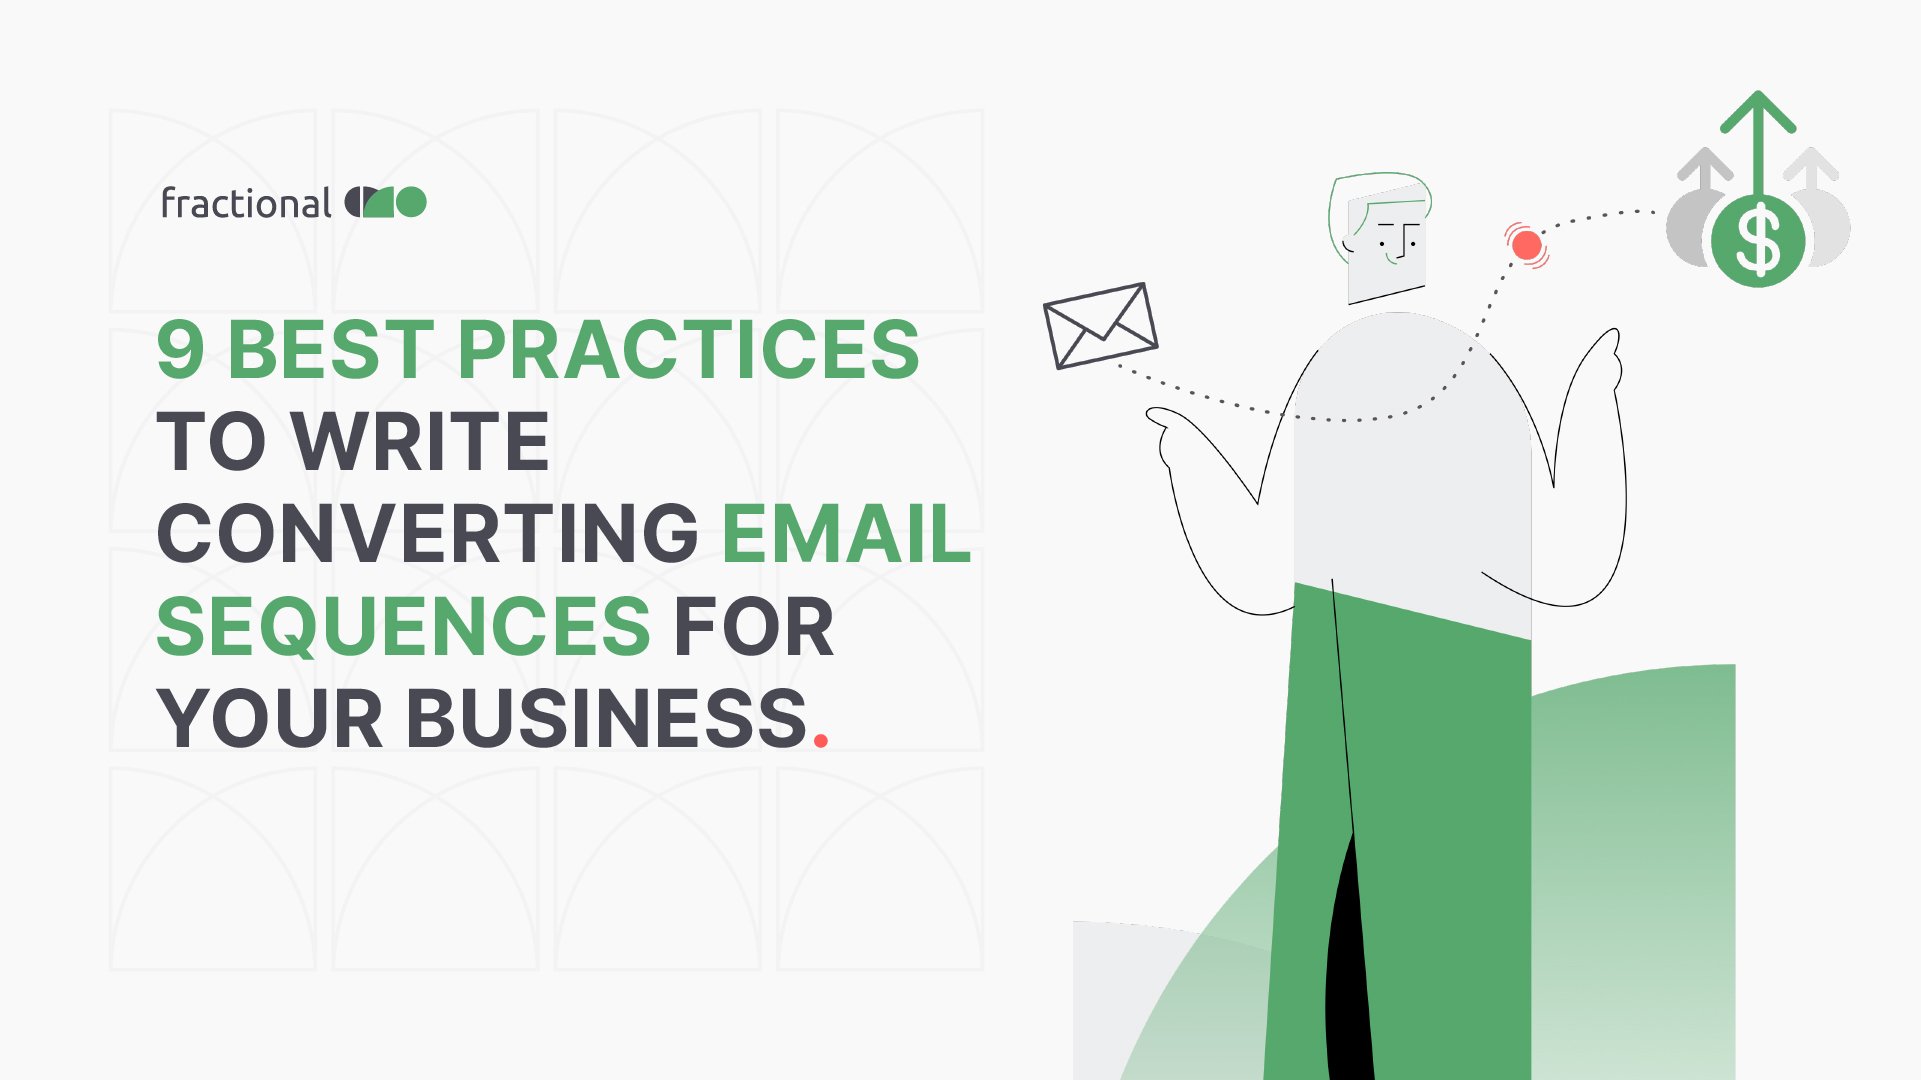 9 best practices to write converting email sequences for your business